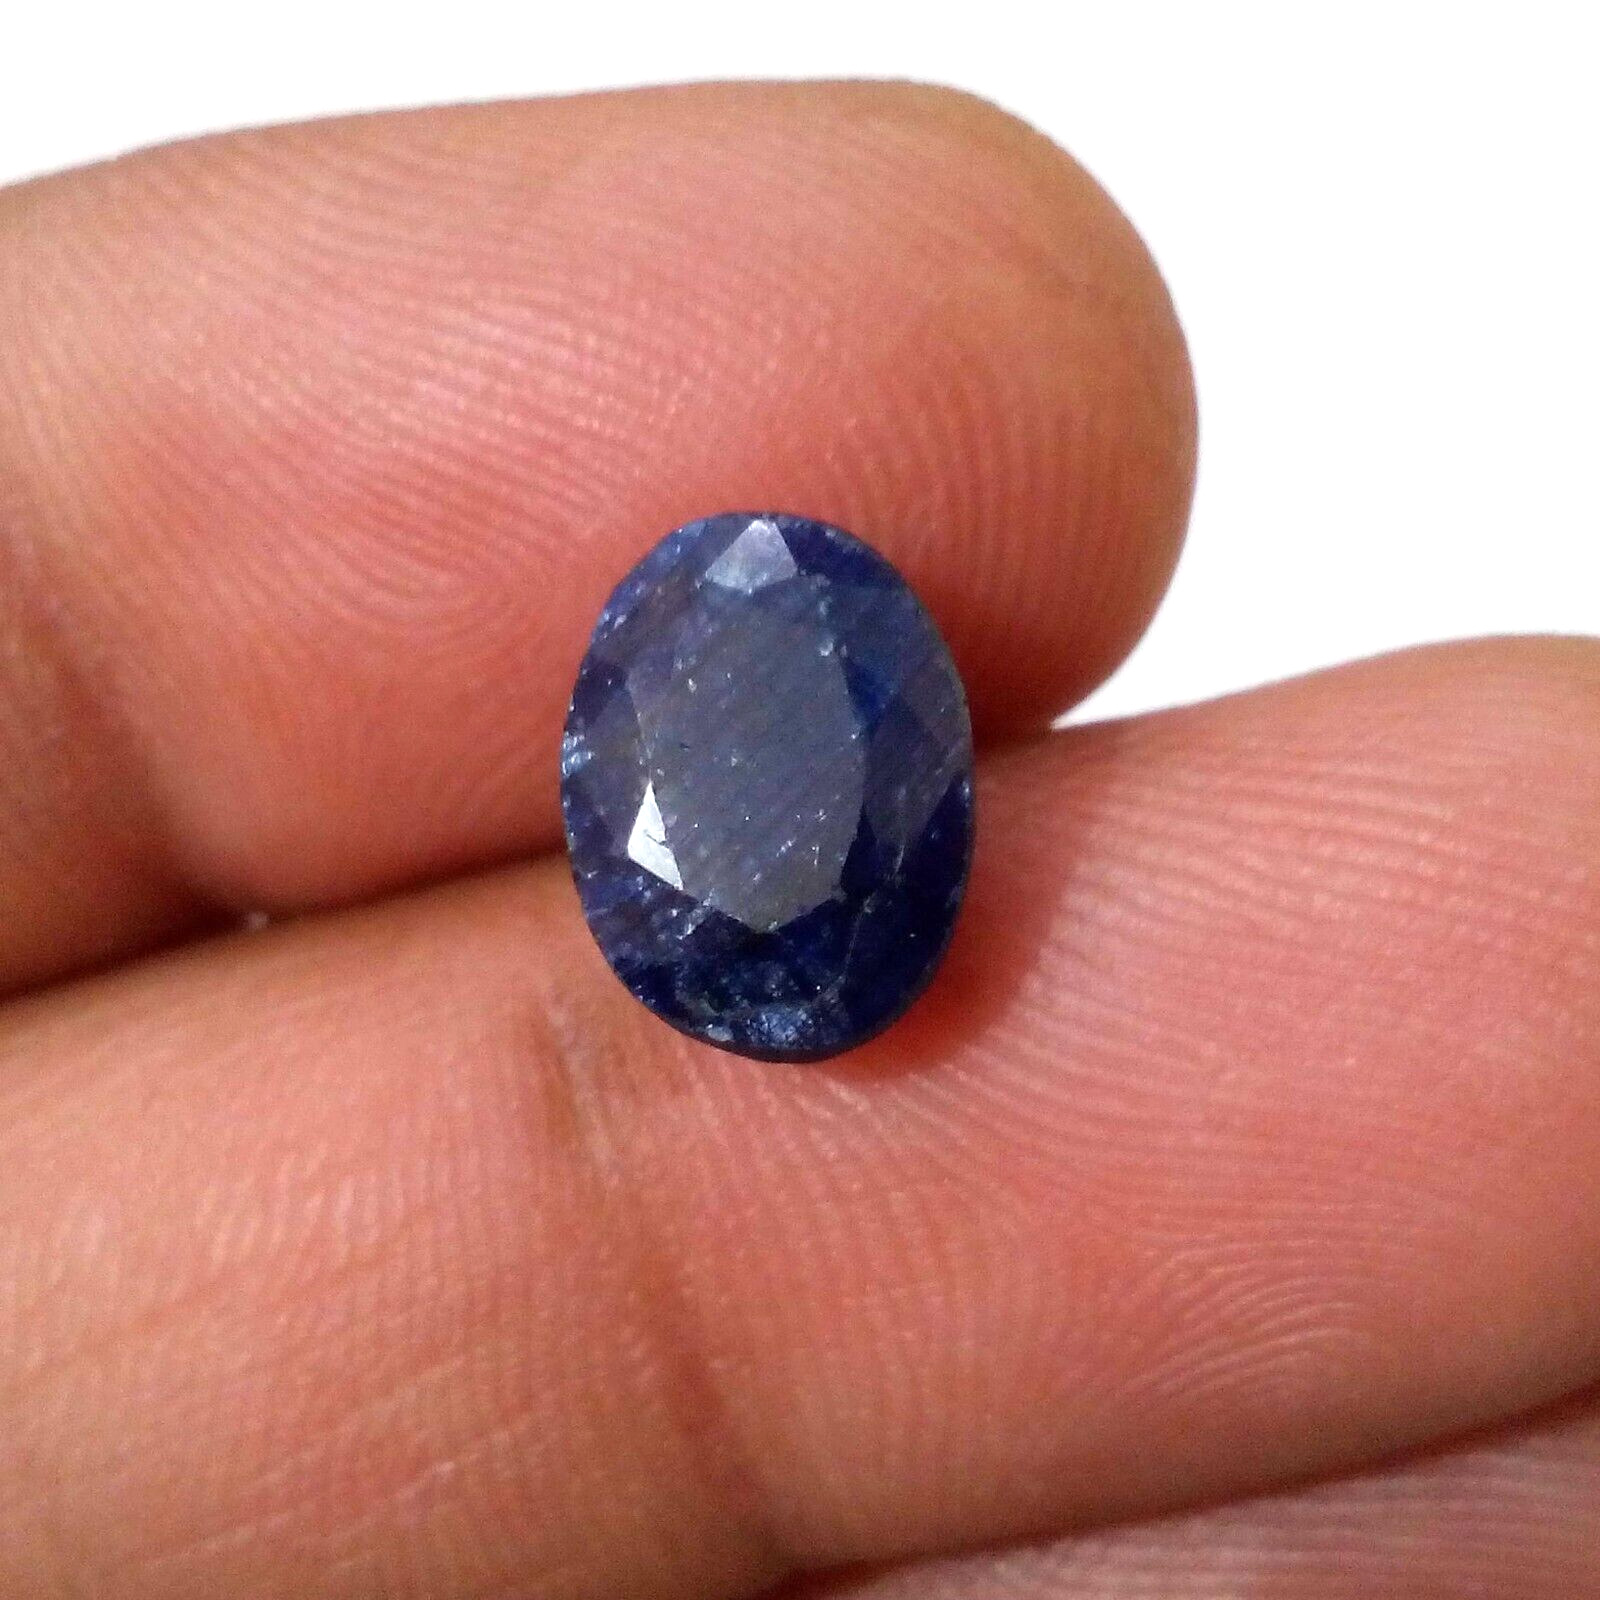 100% Natural Fabulous Blue Sapphire Faceted Oval Shape 6 Crt Loose Gemstone